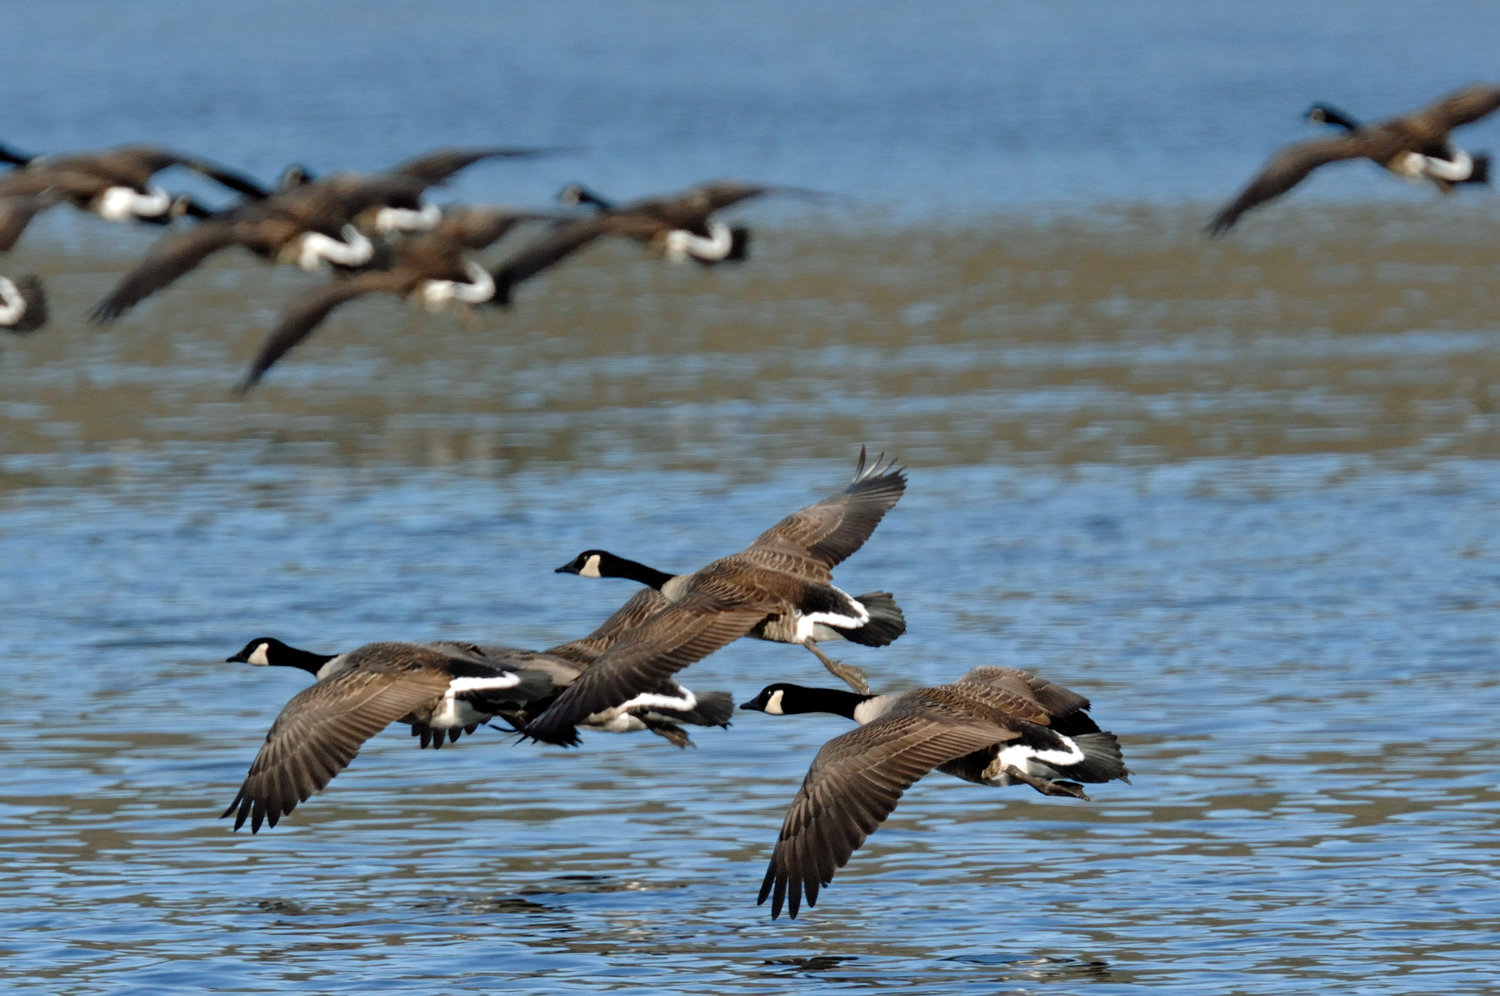 Canada geese begin their migrations around mid-March. As soon as there is open water on a lake, it is a potential feeding or breeding ground for geese and other waterfowl. Geese can fly at altitudes of several thousand feet while migrating; it may be harder to see or hear them when they're that high. The geese in this image were along the Upper Delaware River; geese are present most of the winter on the river due to adequate open water.